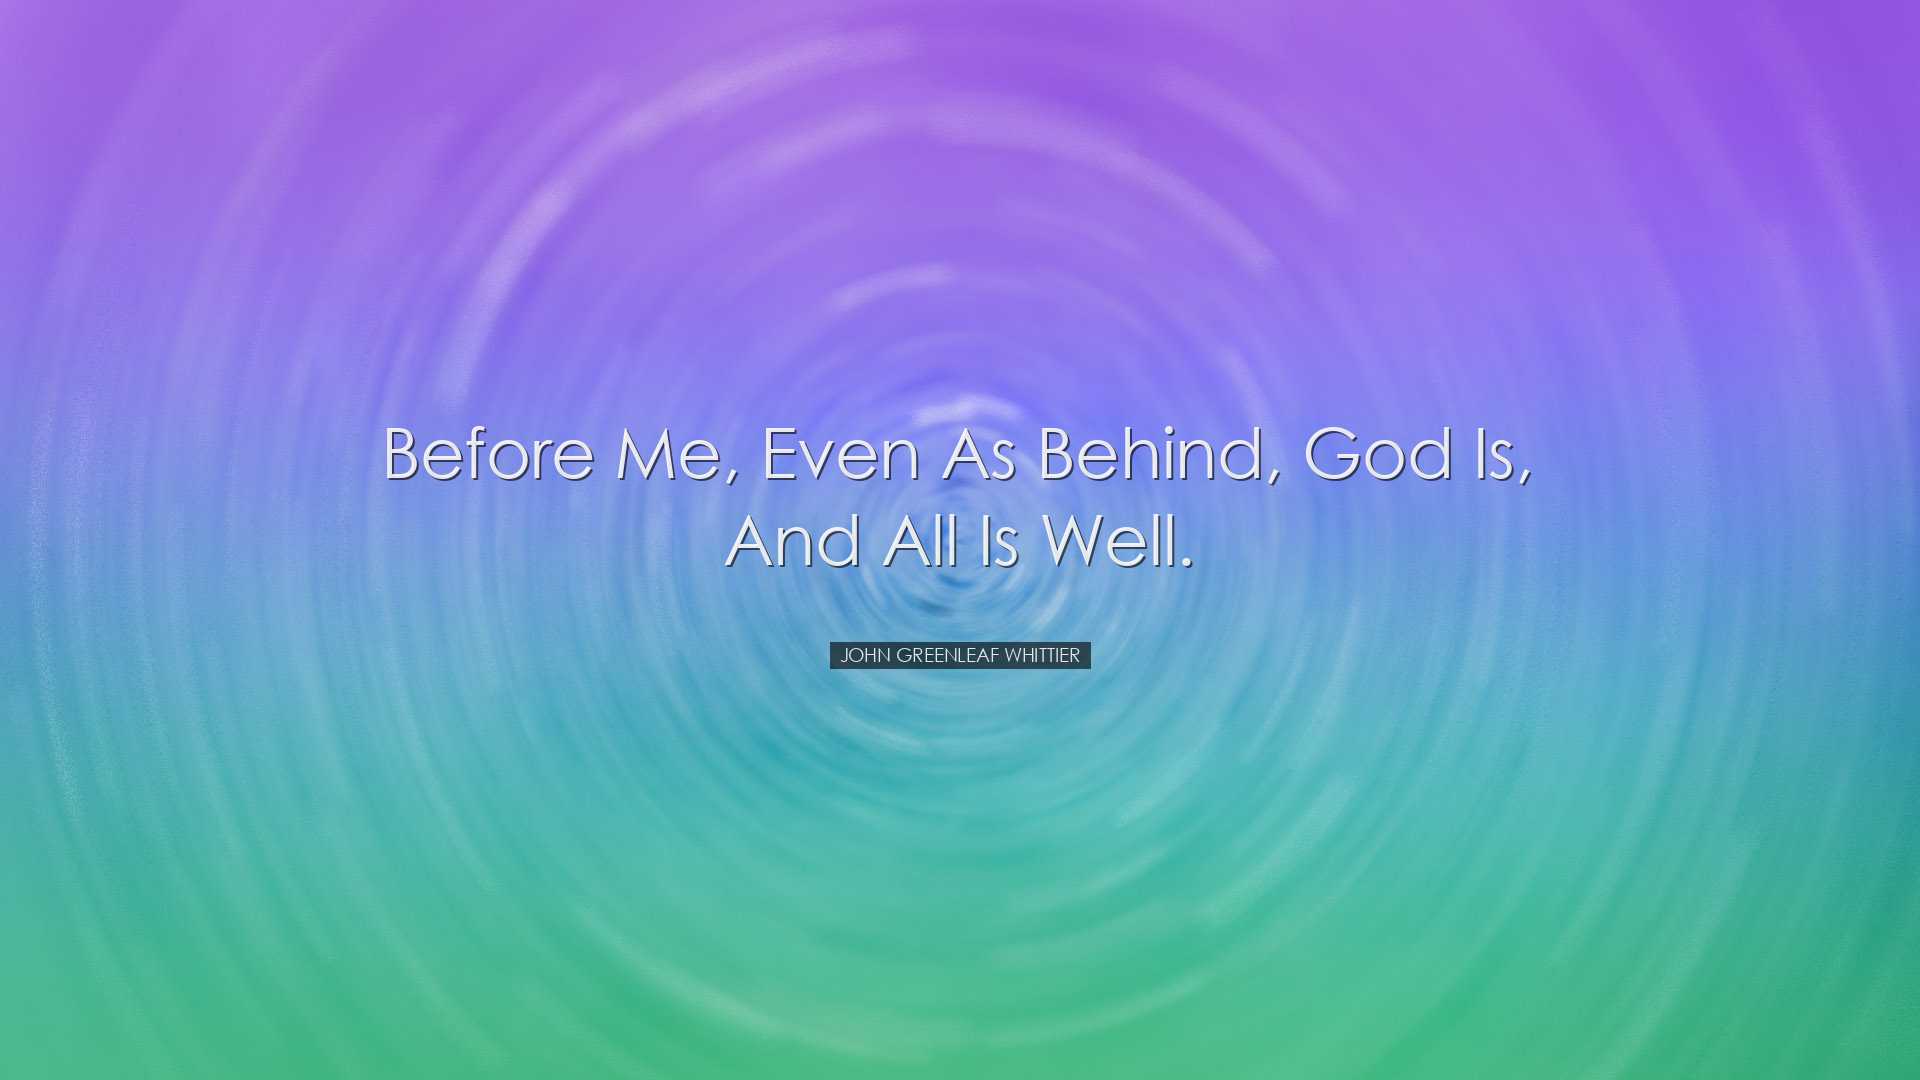 Before me, even as behind, God is, and all is well. - John Greenle